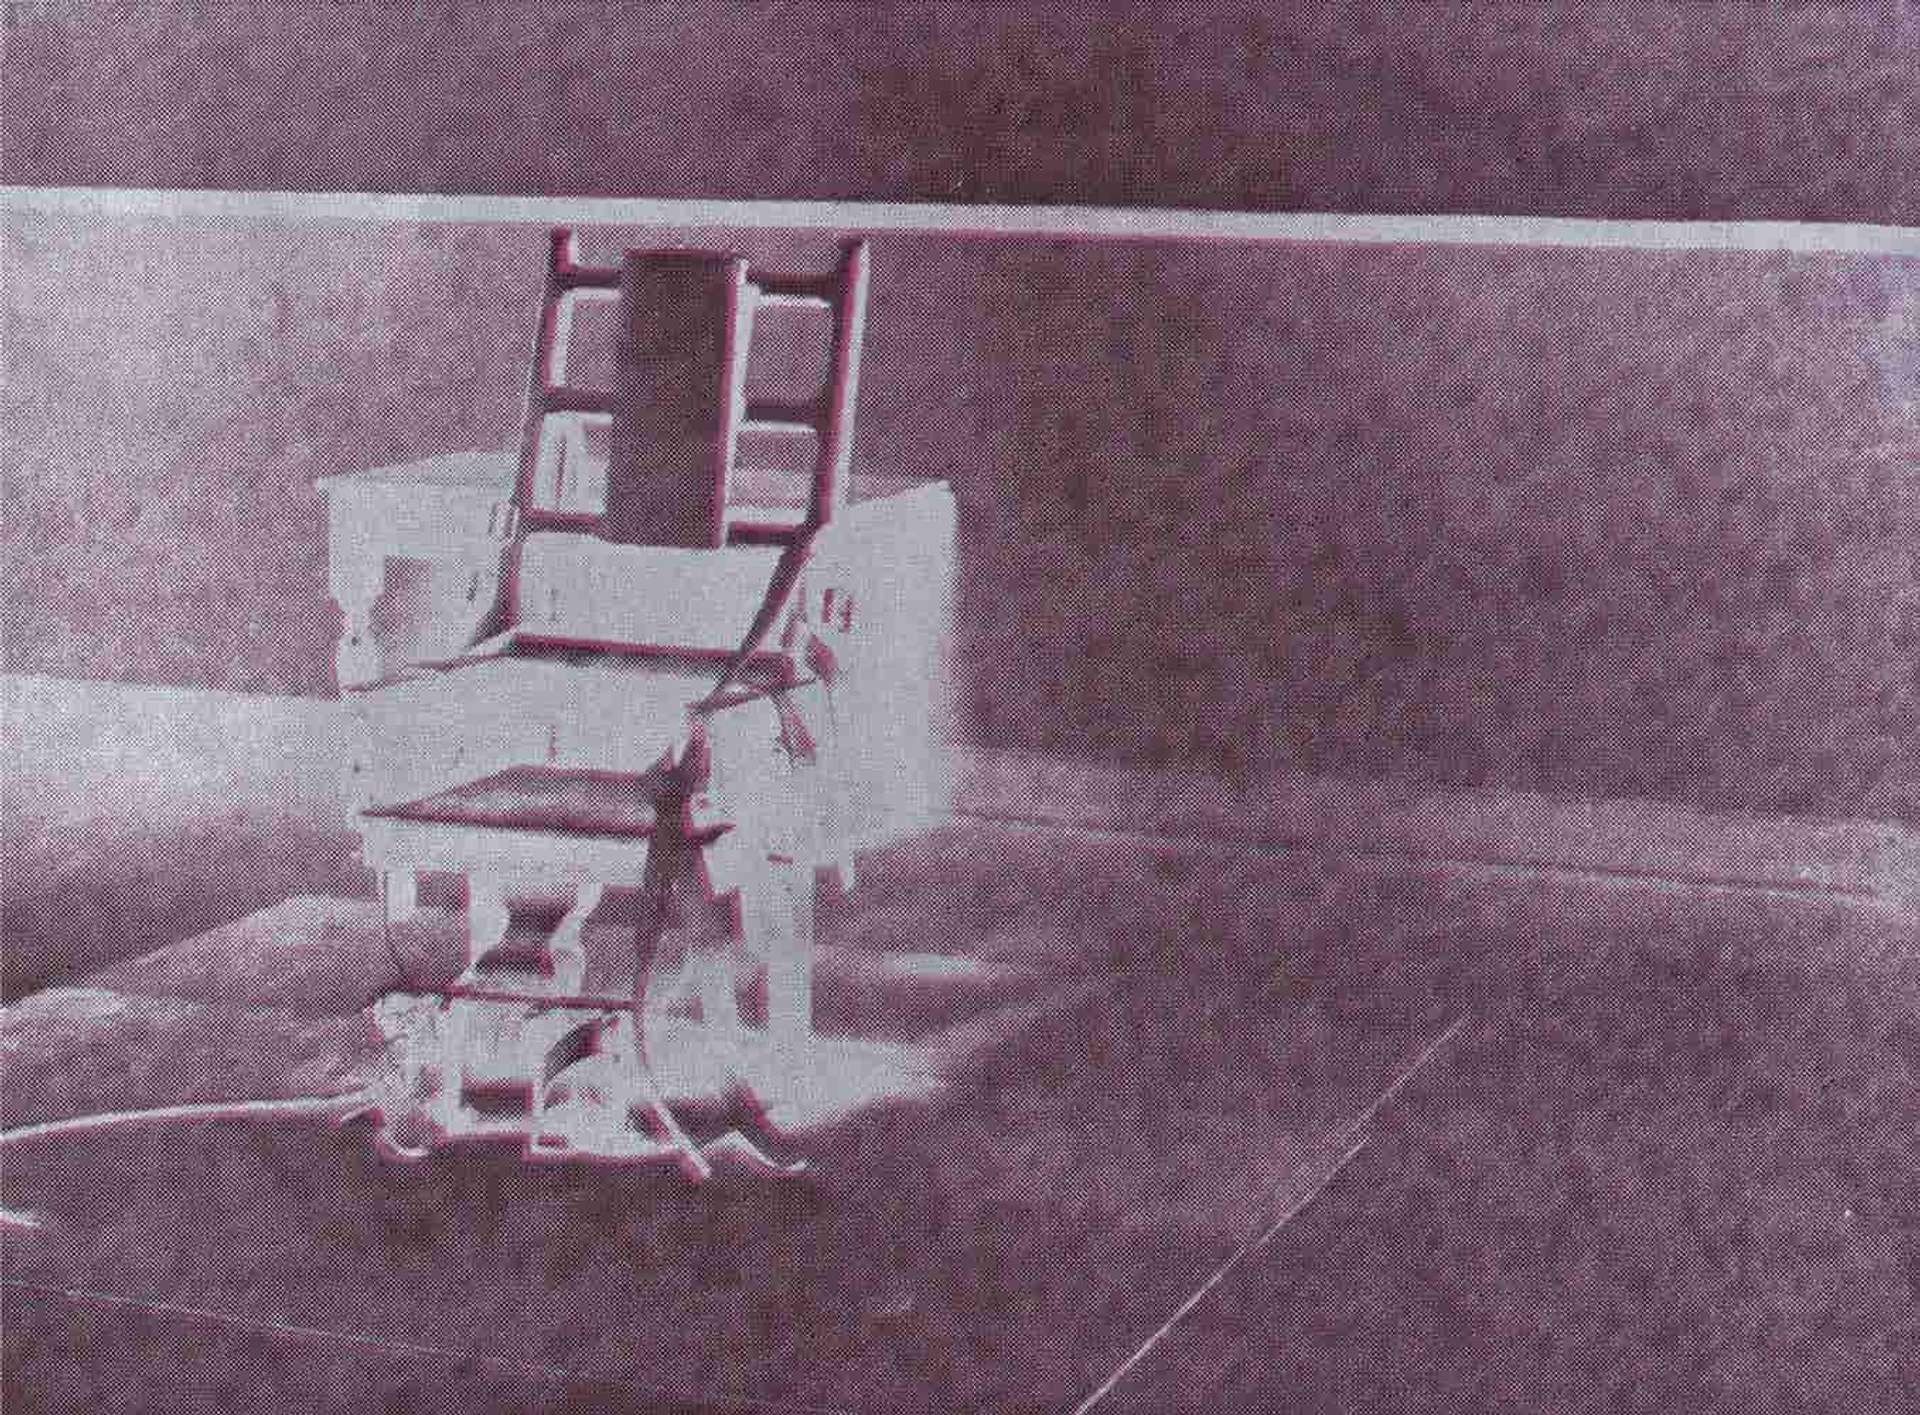 Electric Chair (F & S 11.78) by Andy Warhol